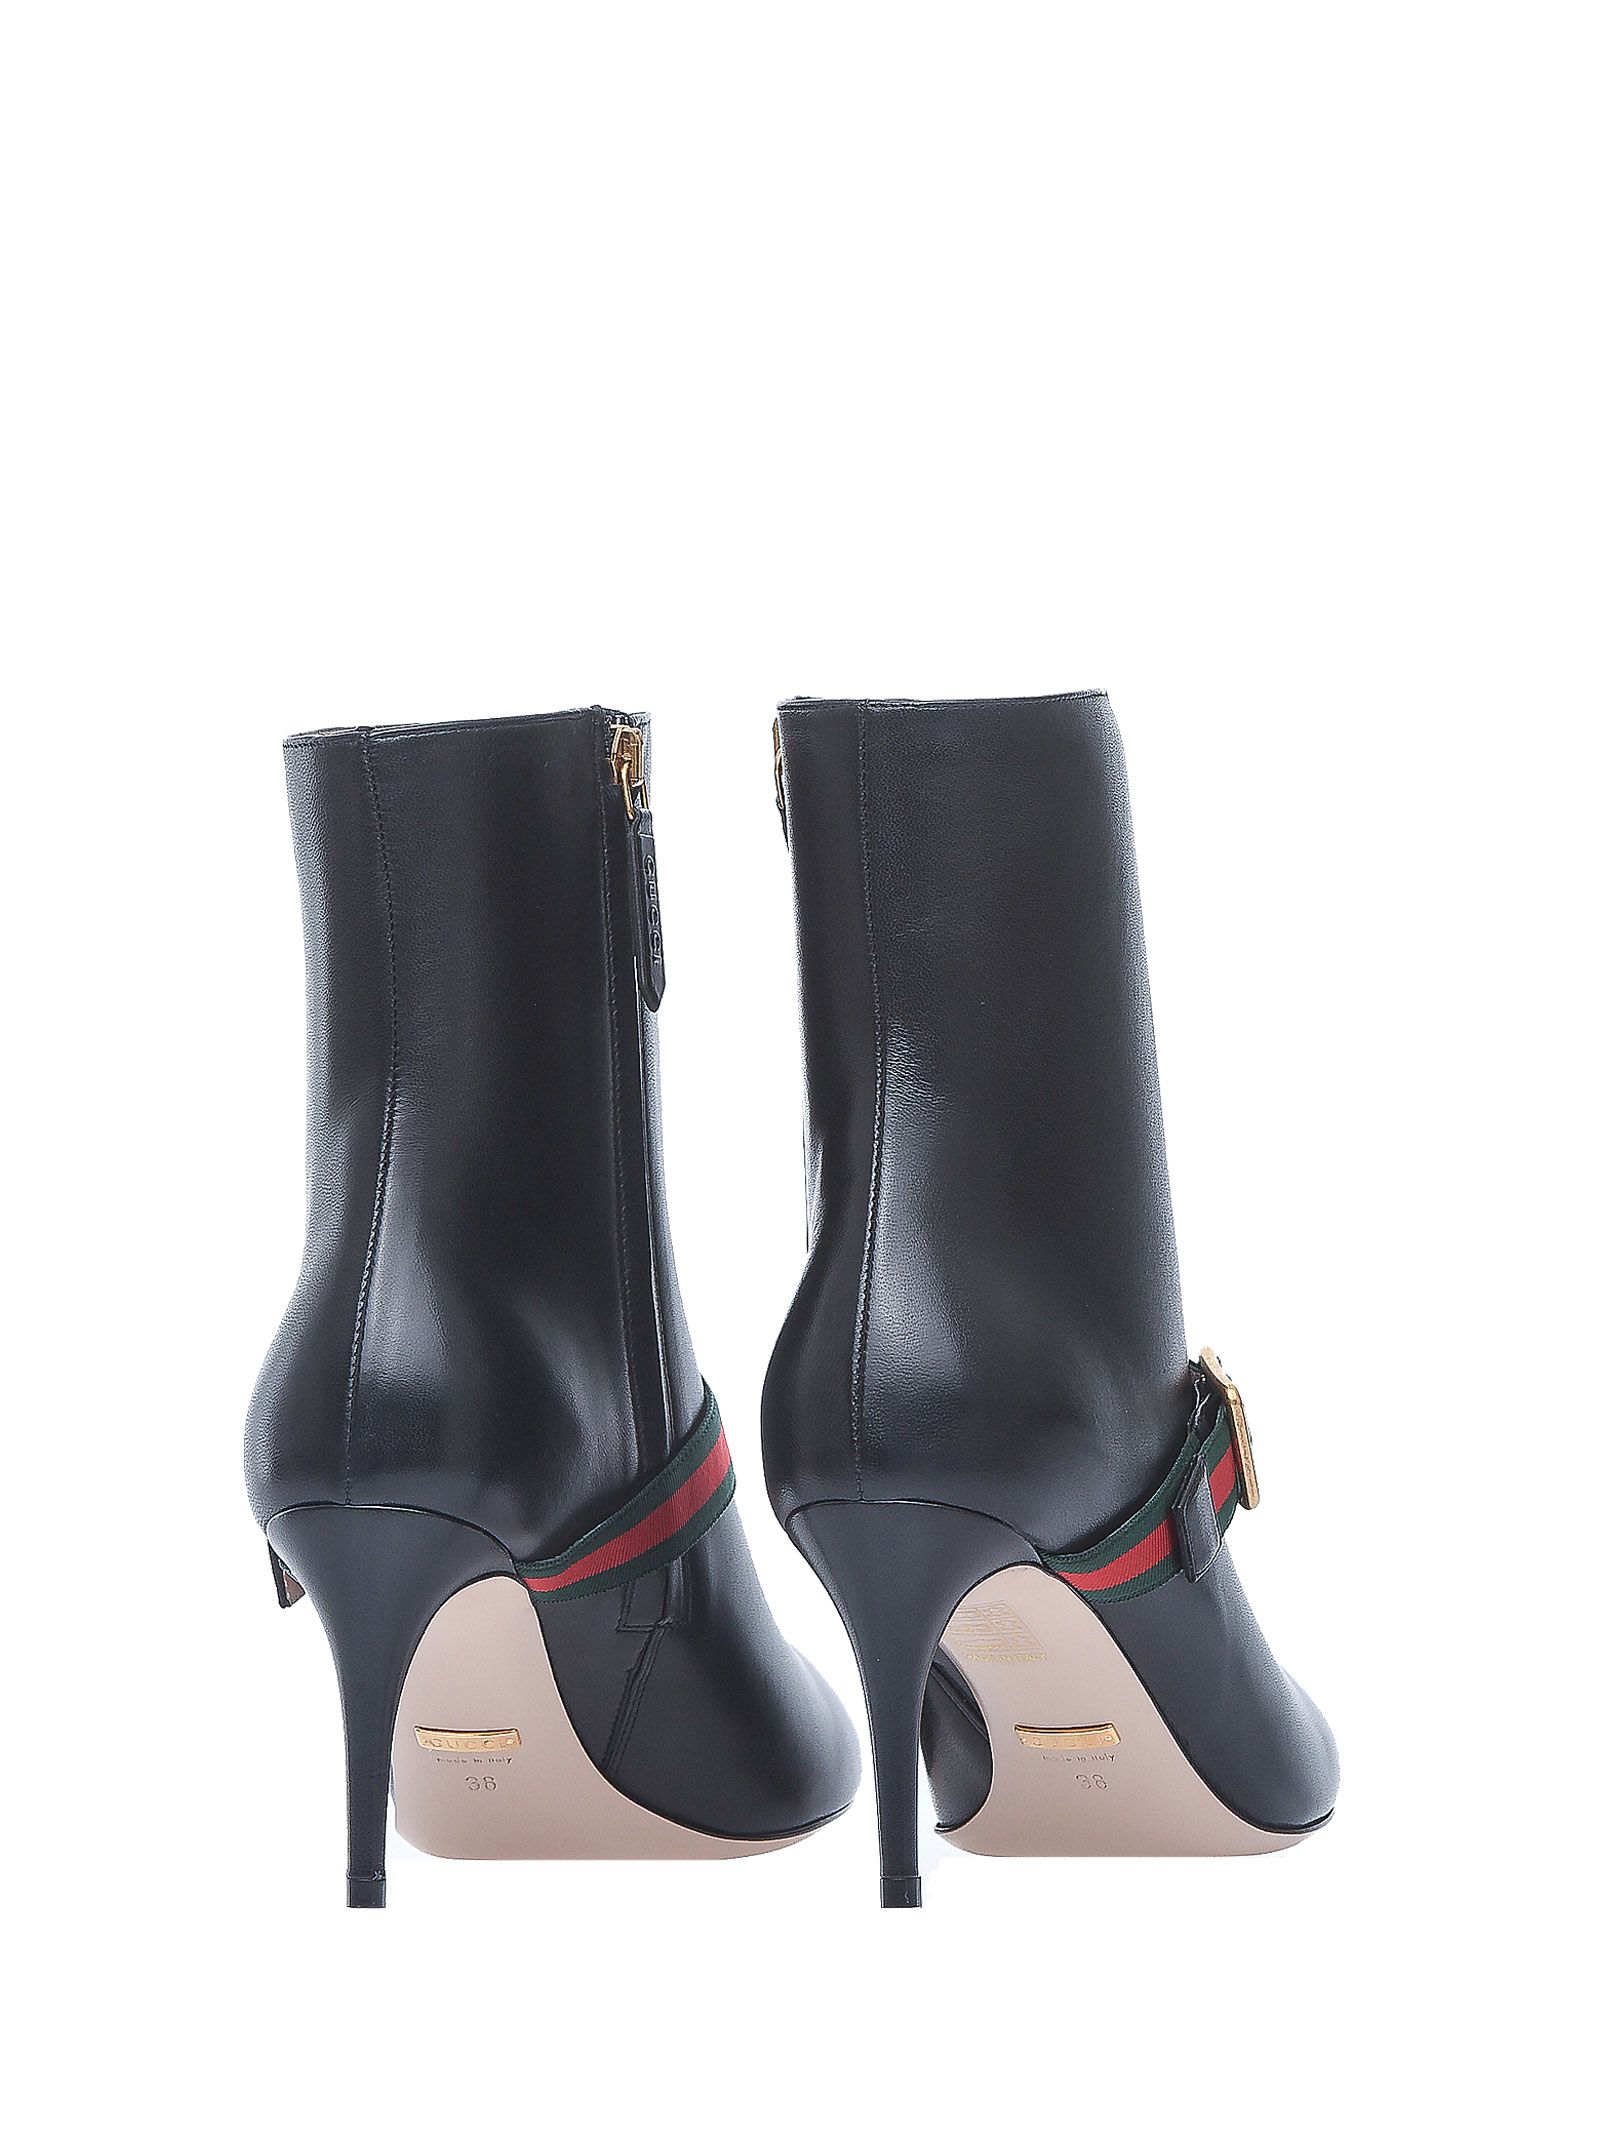 Gucci - Gucci Black Leather Ankle Boots - NERO, Women&#39;s Boots | Italist